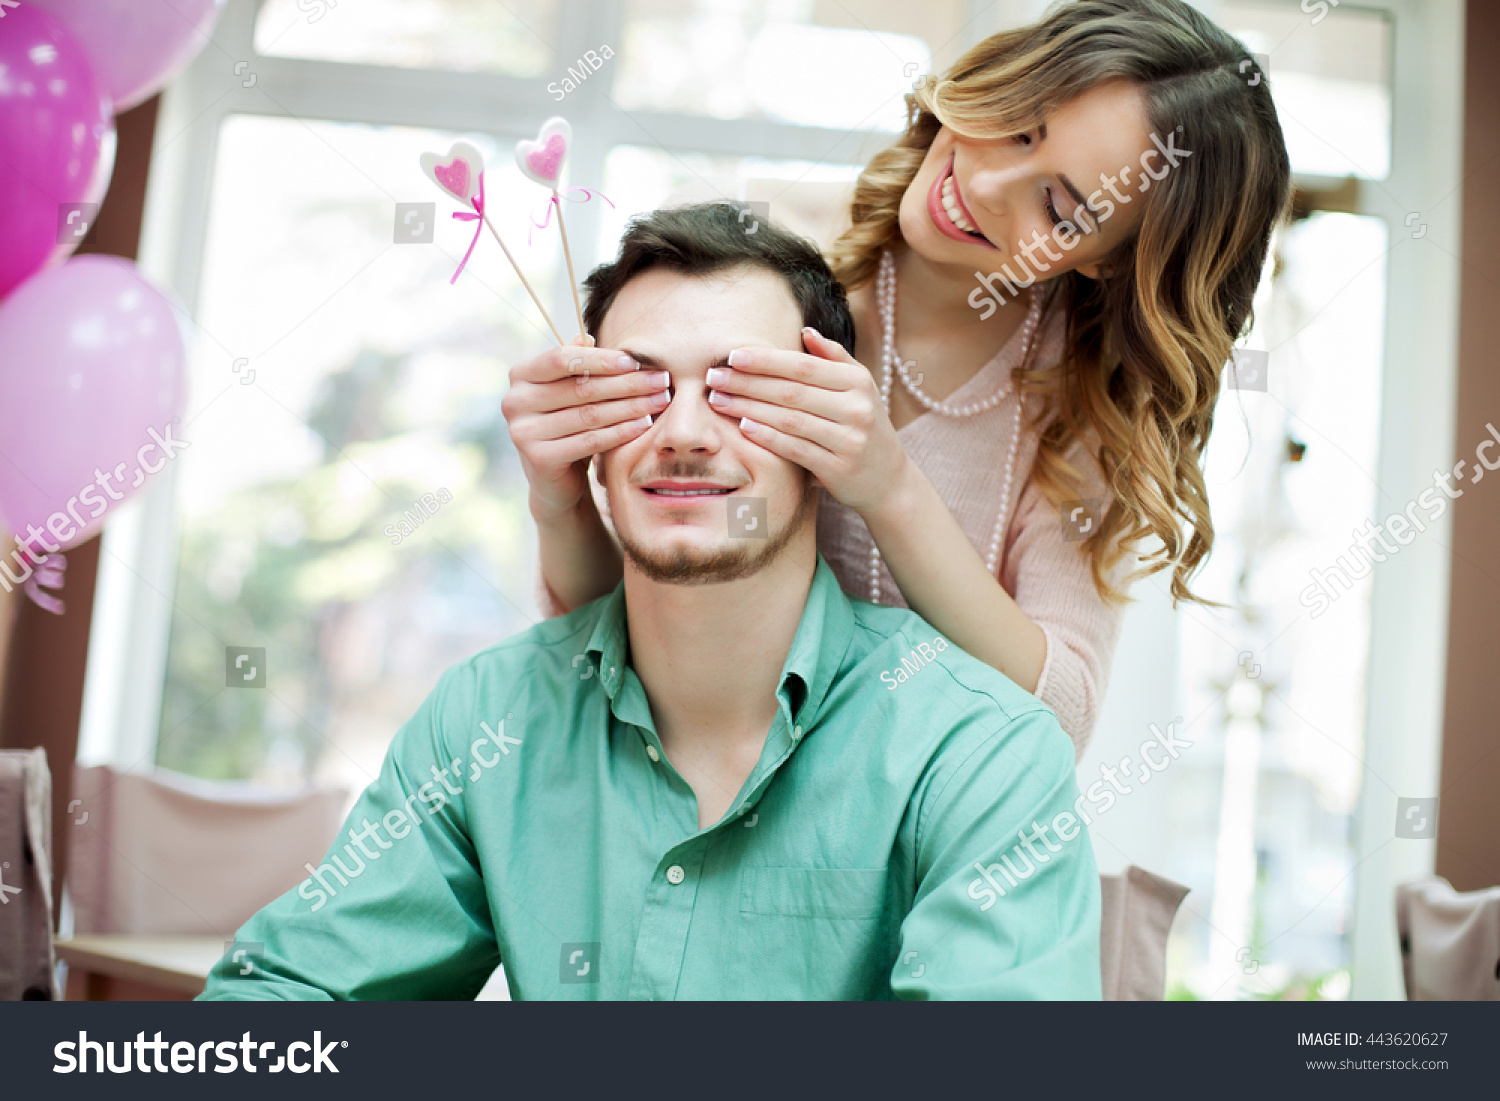 Girl Puts Hands On Boys Eyes Stock Photo Edit Now 443620627